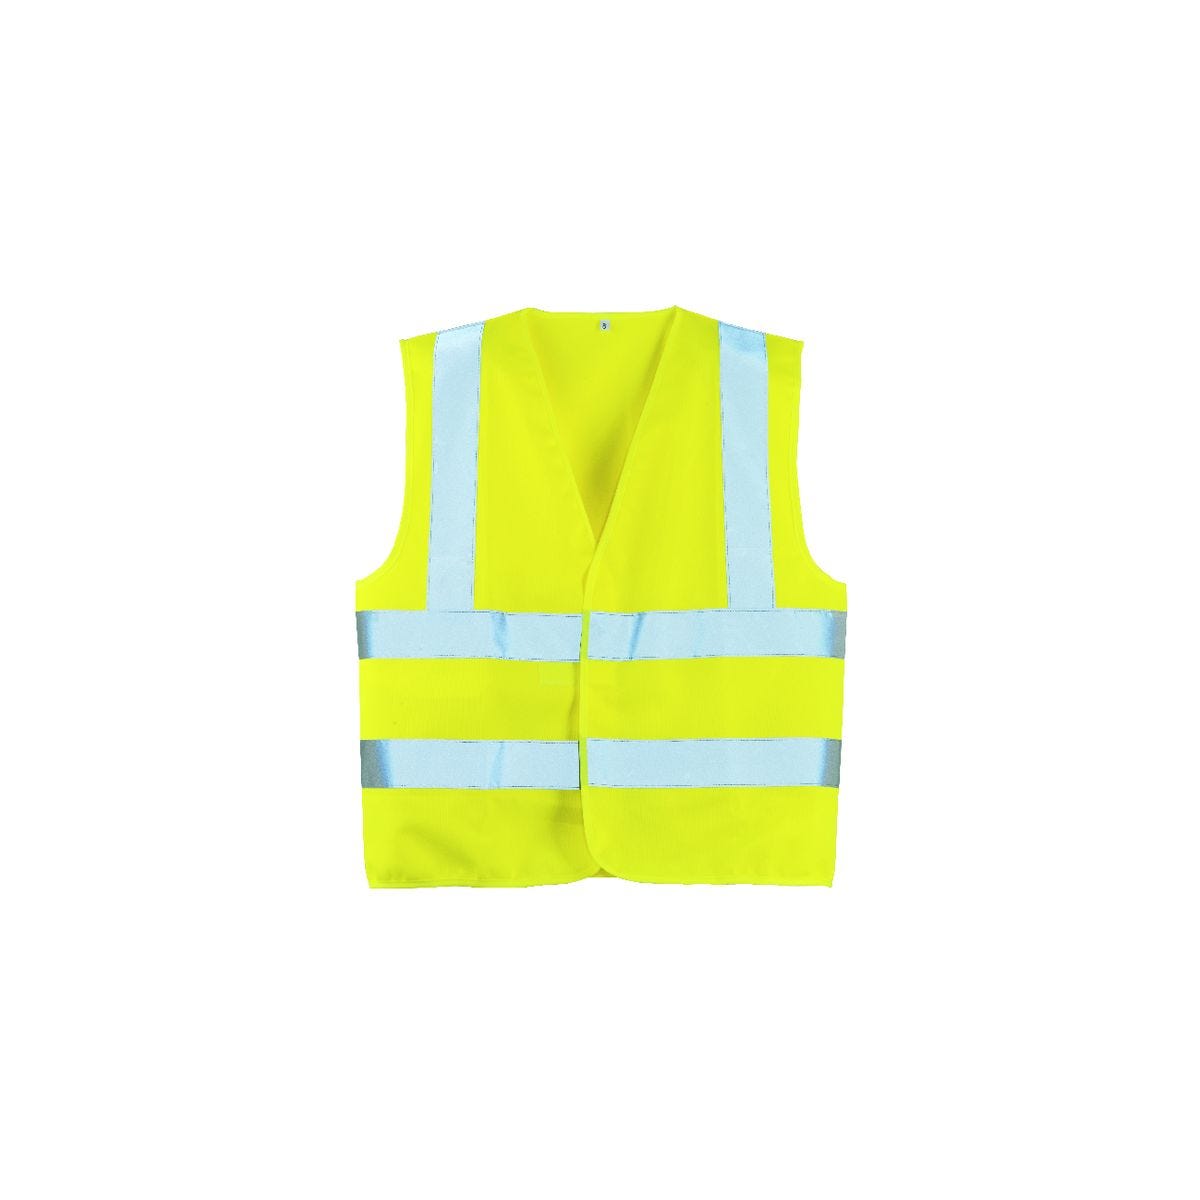 Gilet YARD jaune HV, baudrier + double bande - COVERGUARD - Taille XL 0